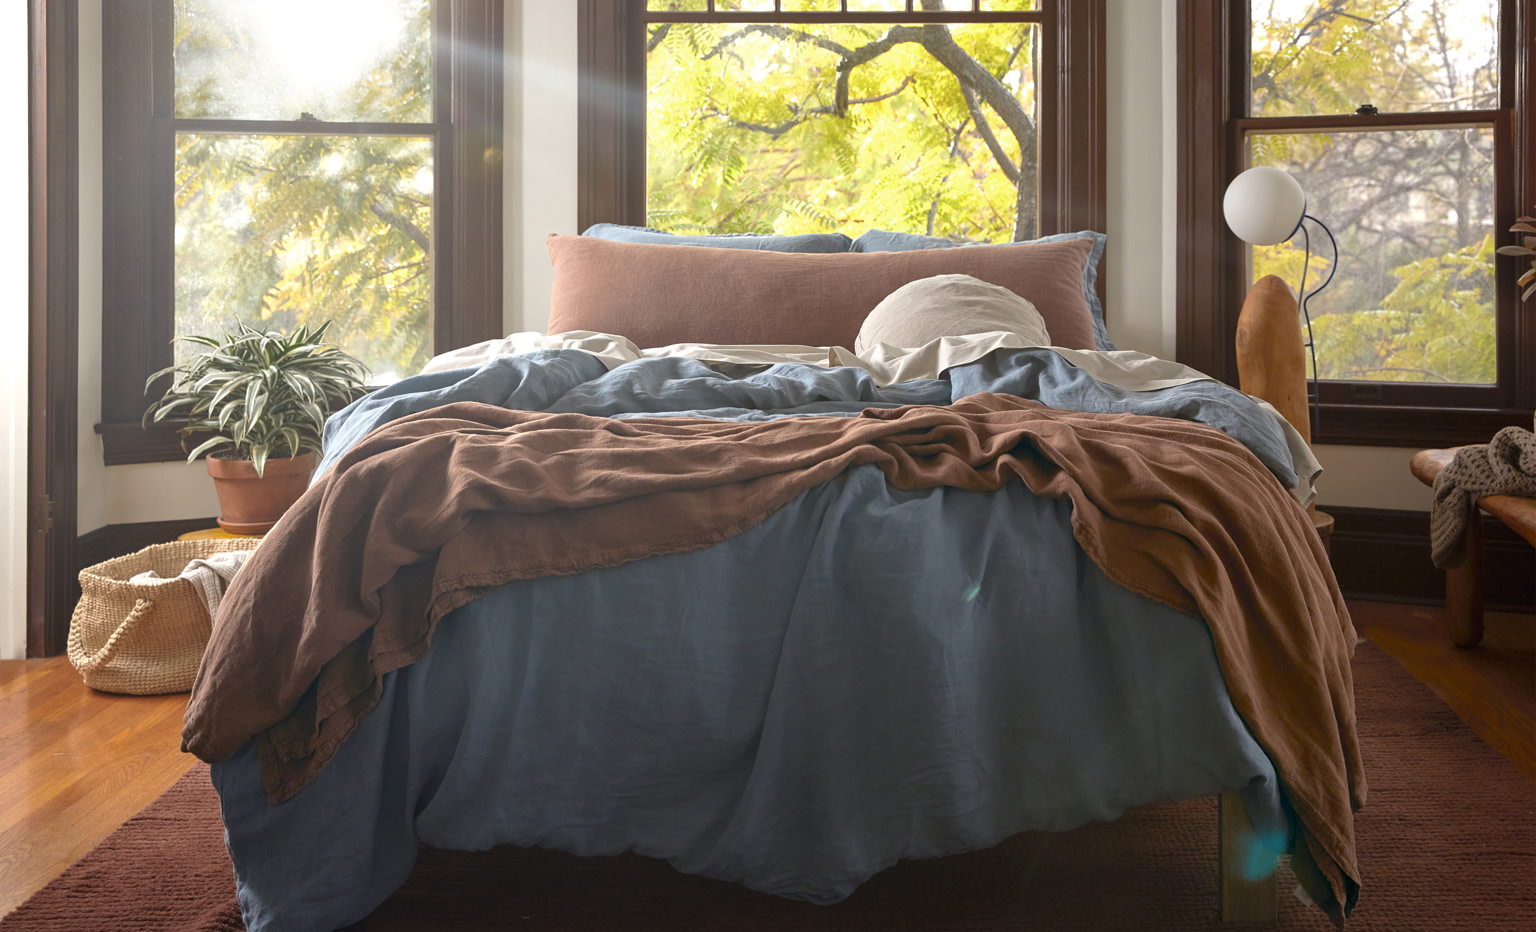 The Effortlessly Undone Bed Campaign Image